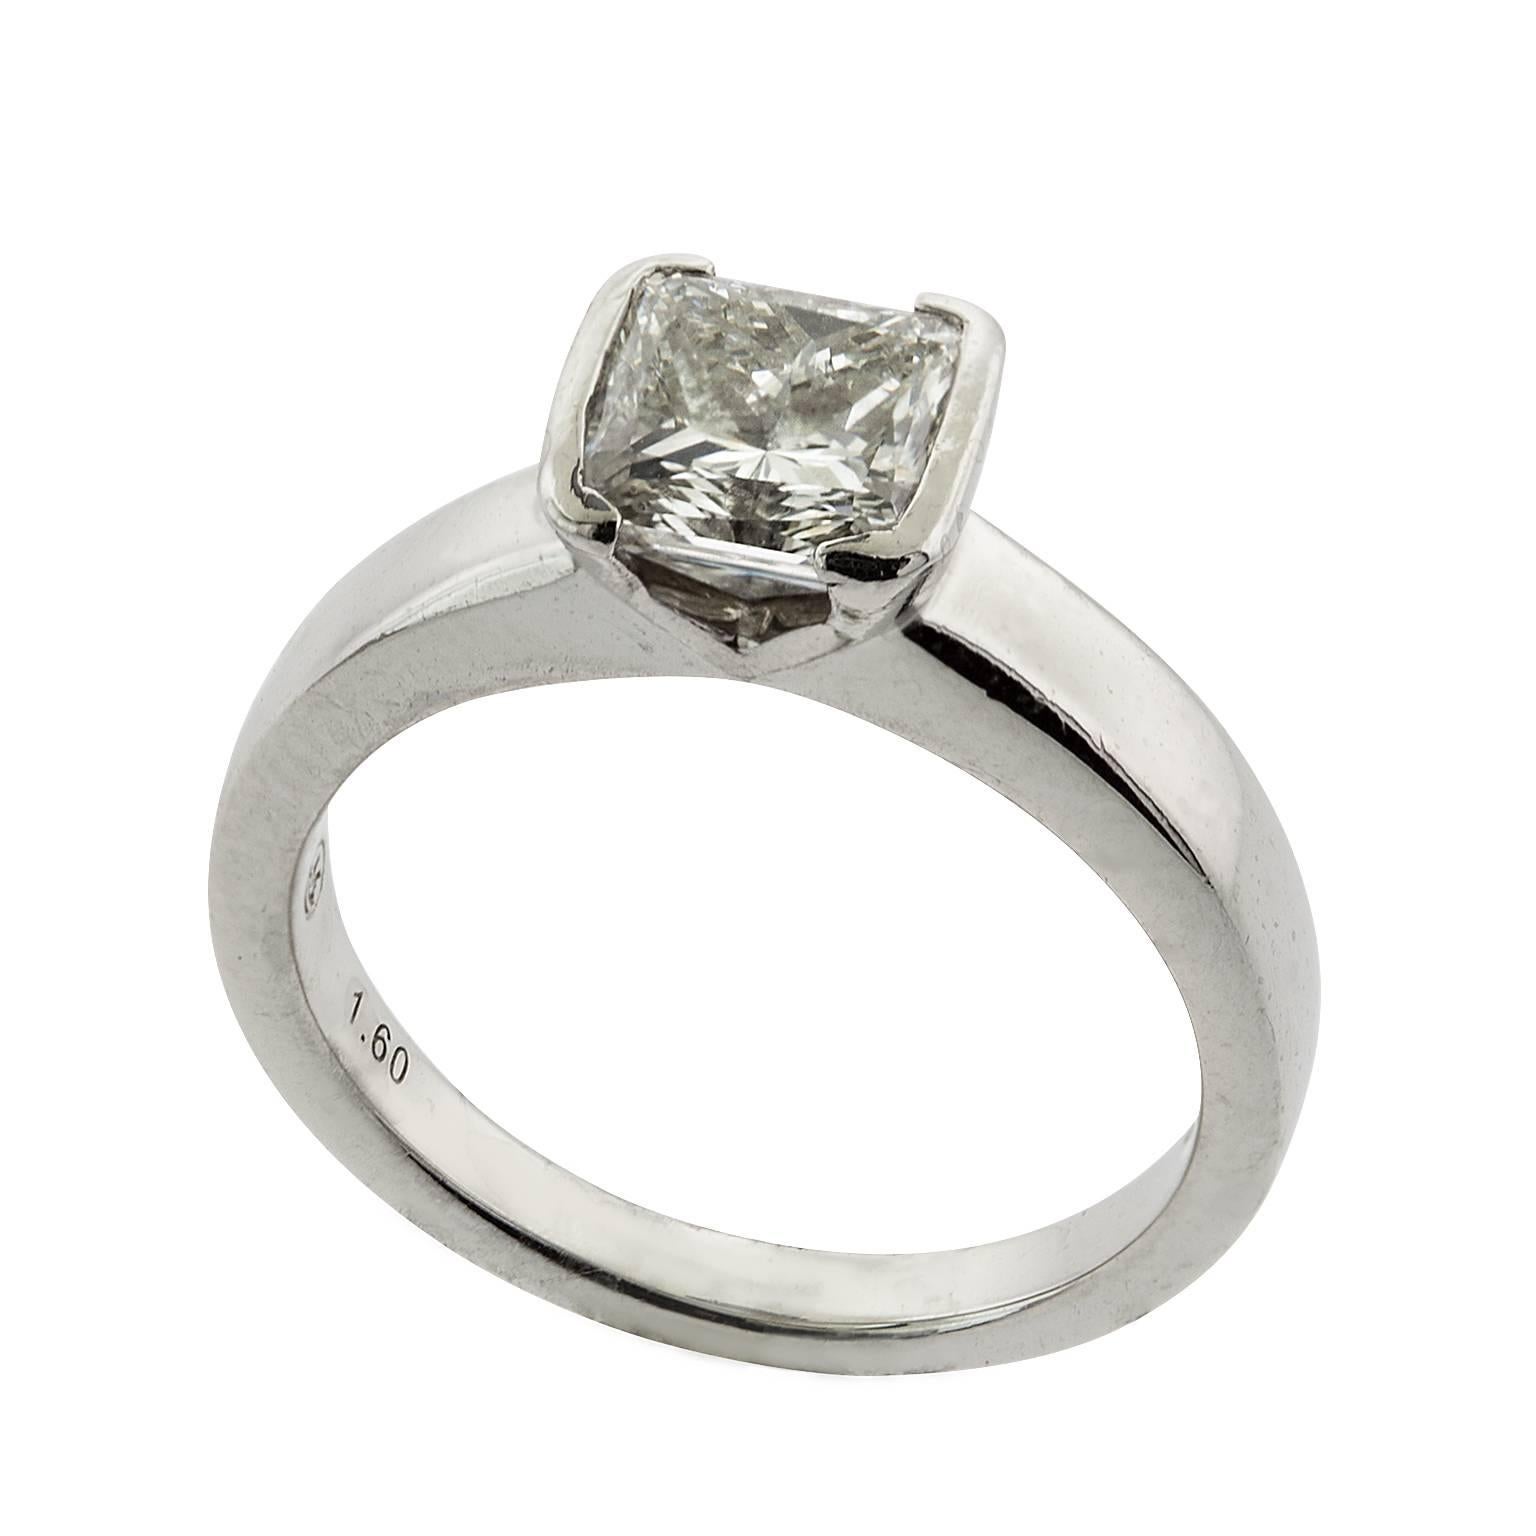 A 1.60 carat half bezel set princess cut diamond engagement ring in platinum.  The diamond is graded by GIA as H color, VS2 Clarity, and has an amazing amount of brilliance.  The half bezel head sits atop a tapered shoulder shank.  

GIA Report#: 